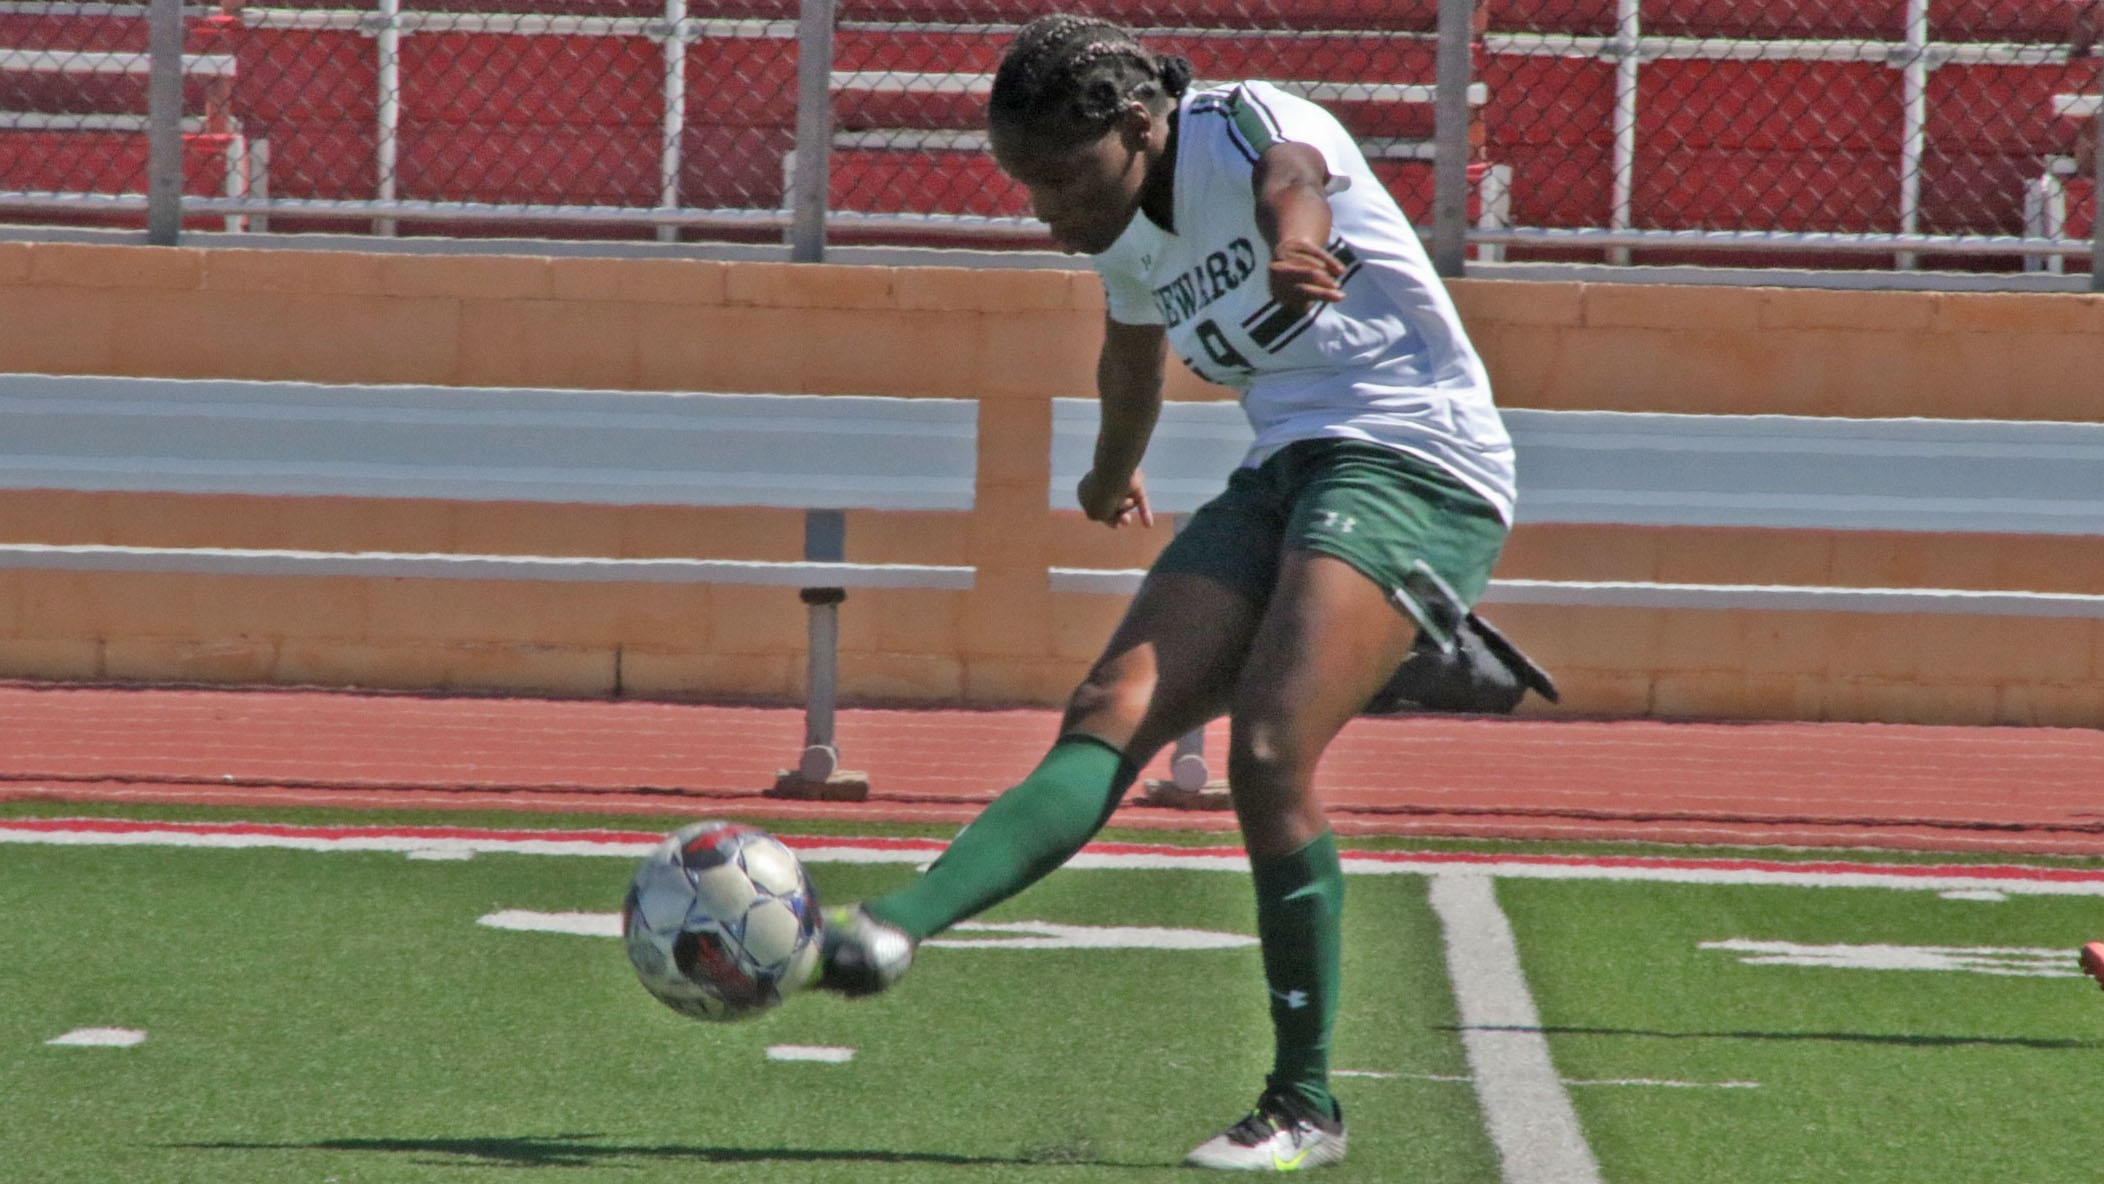 SCCC Knocked Down in 5-0 Loss to Blue Devils